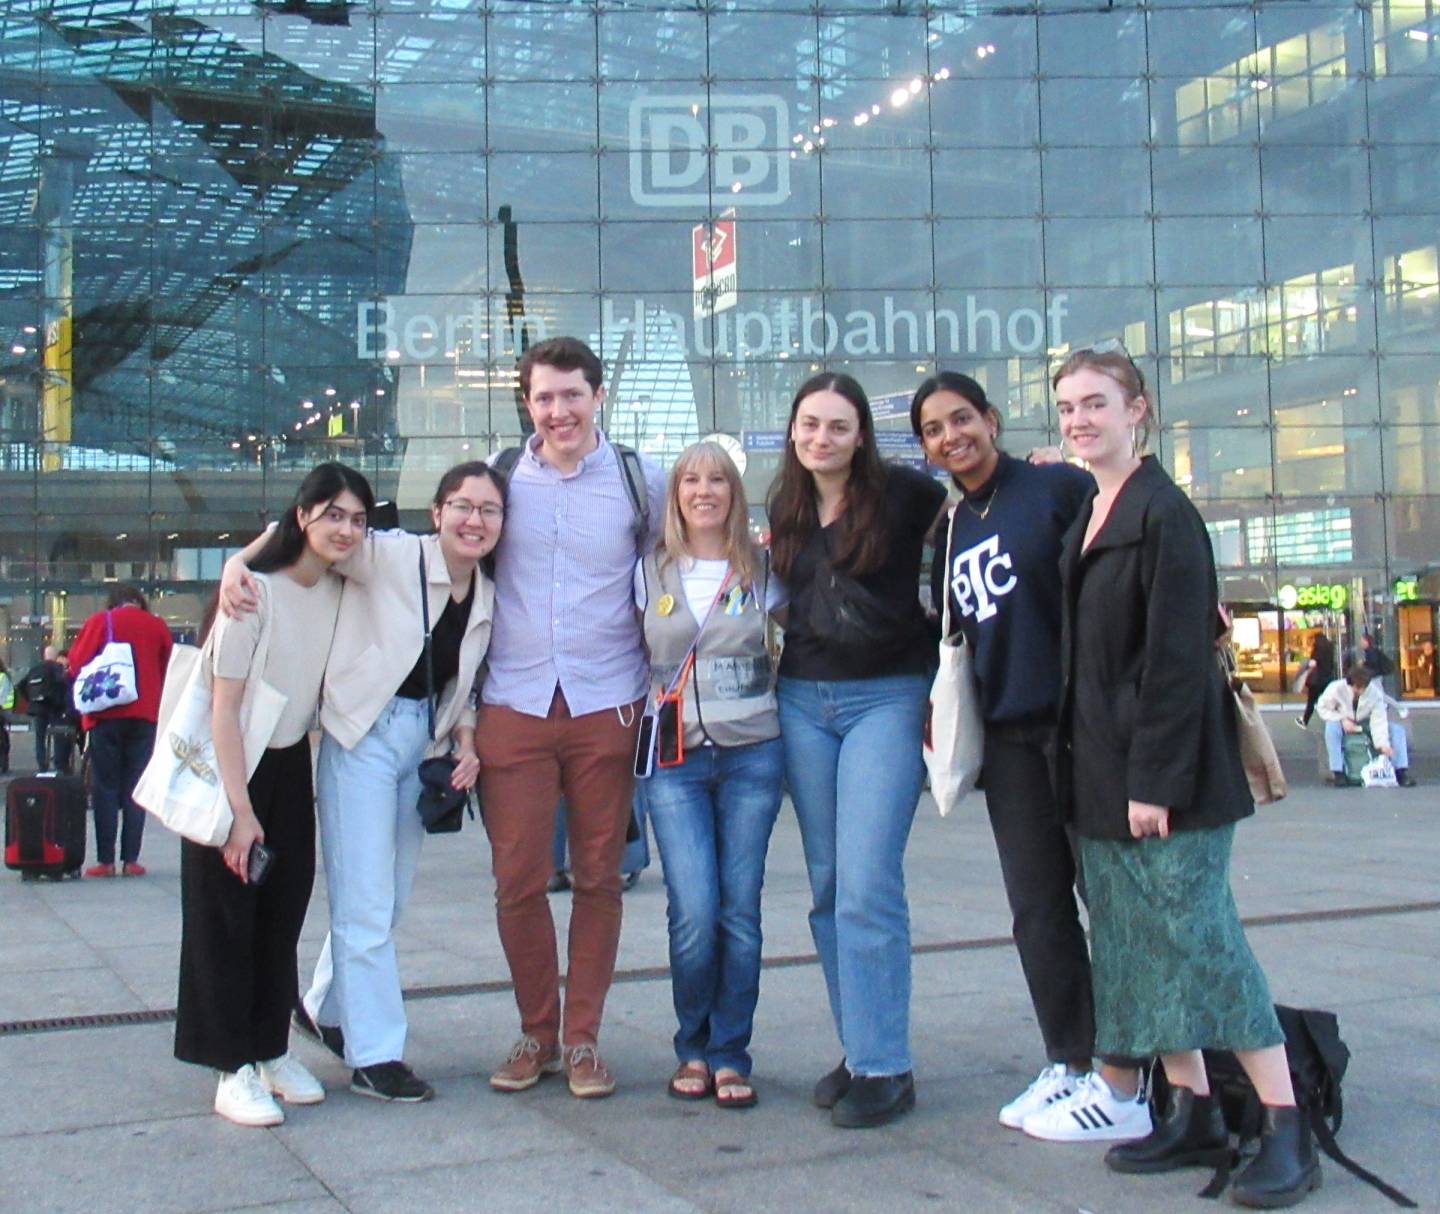 Students visiting the Berlin Train Station